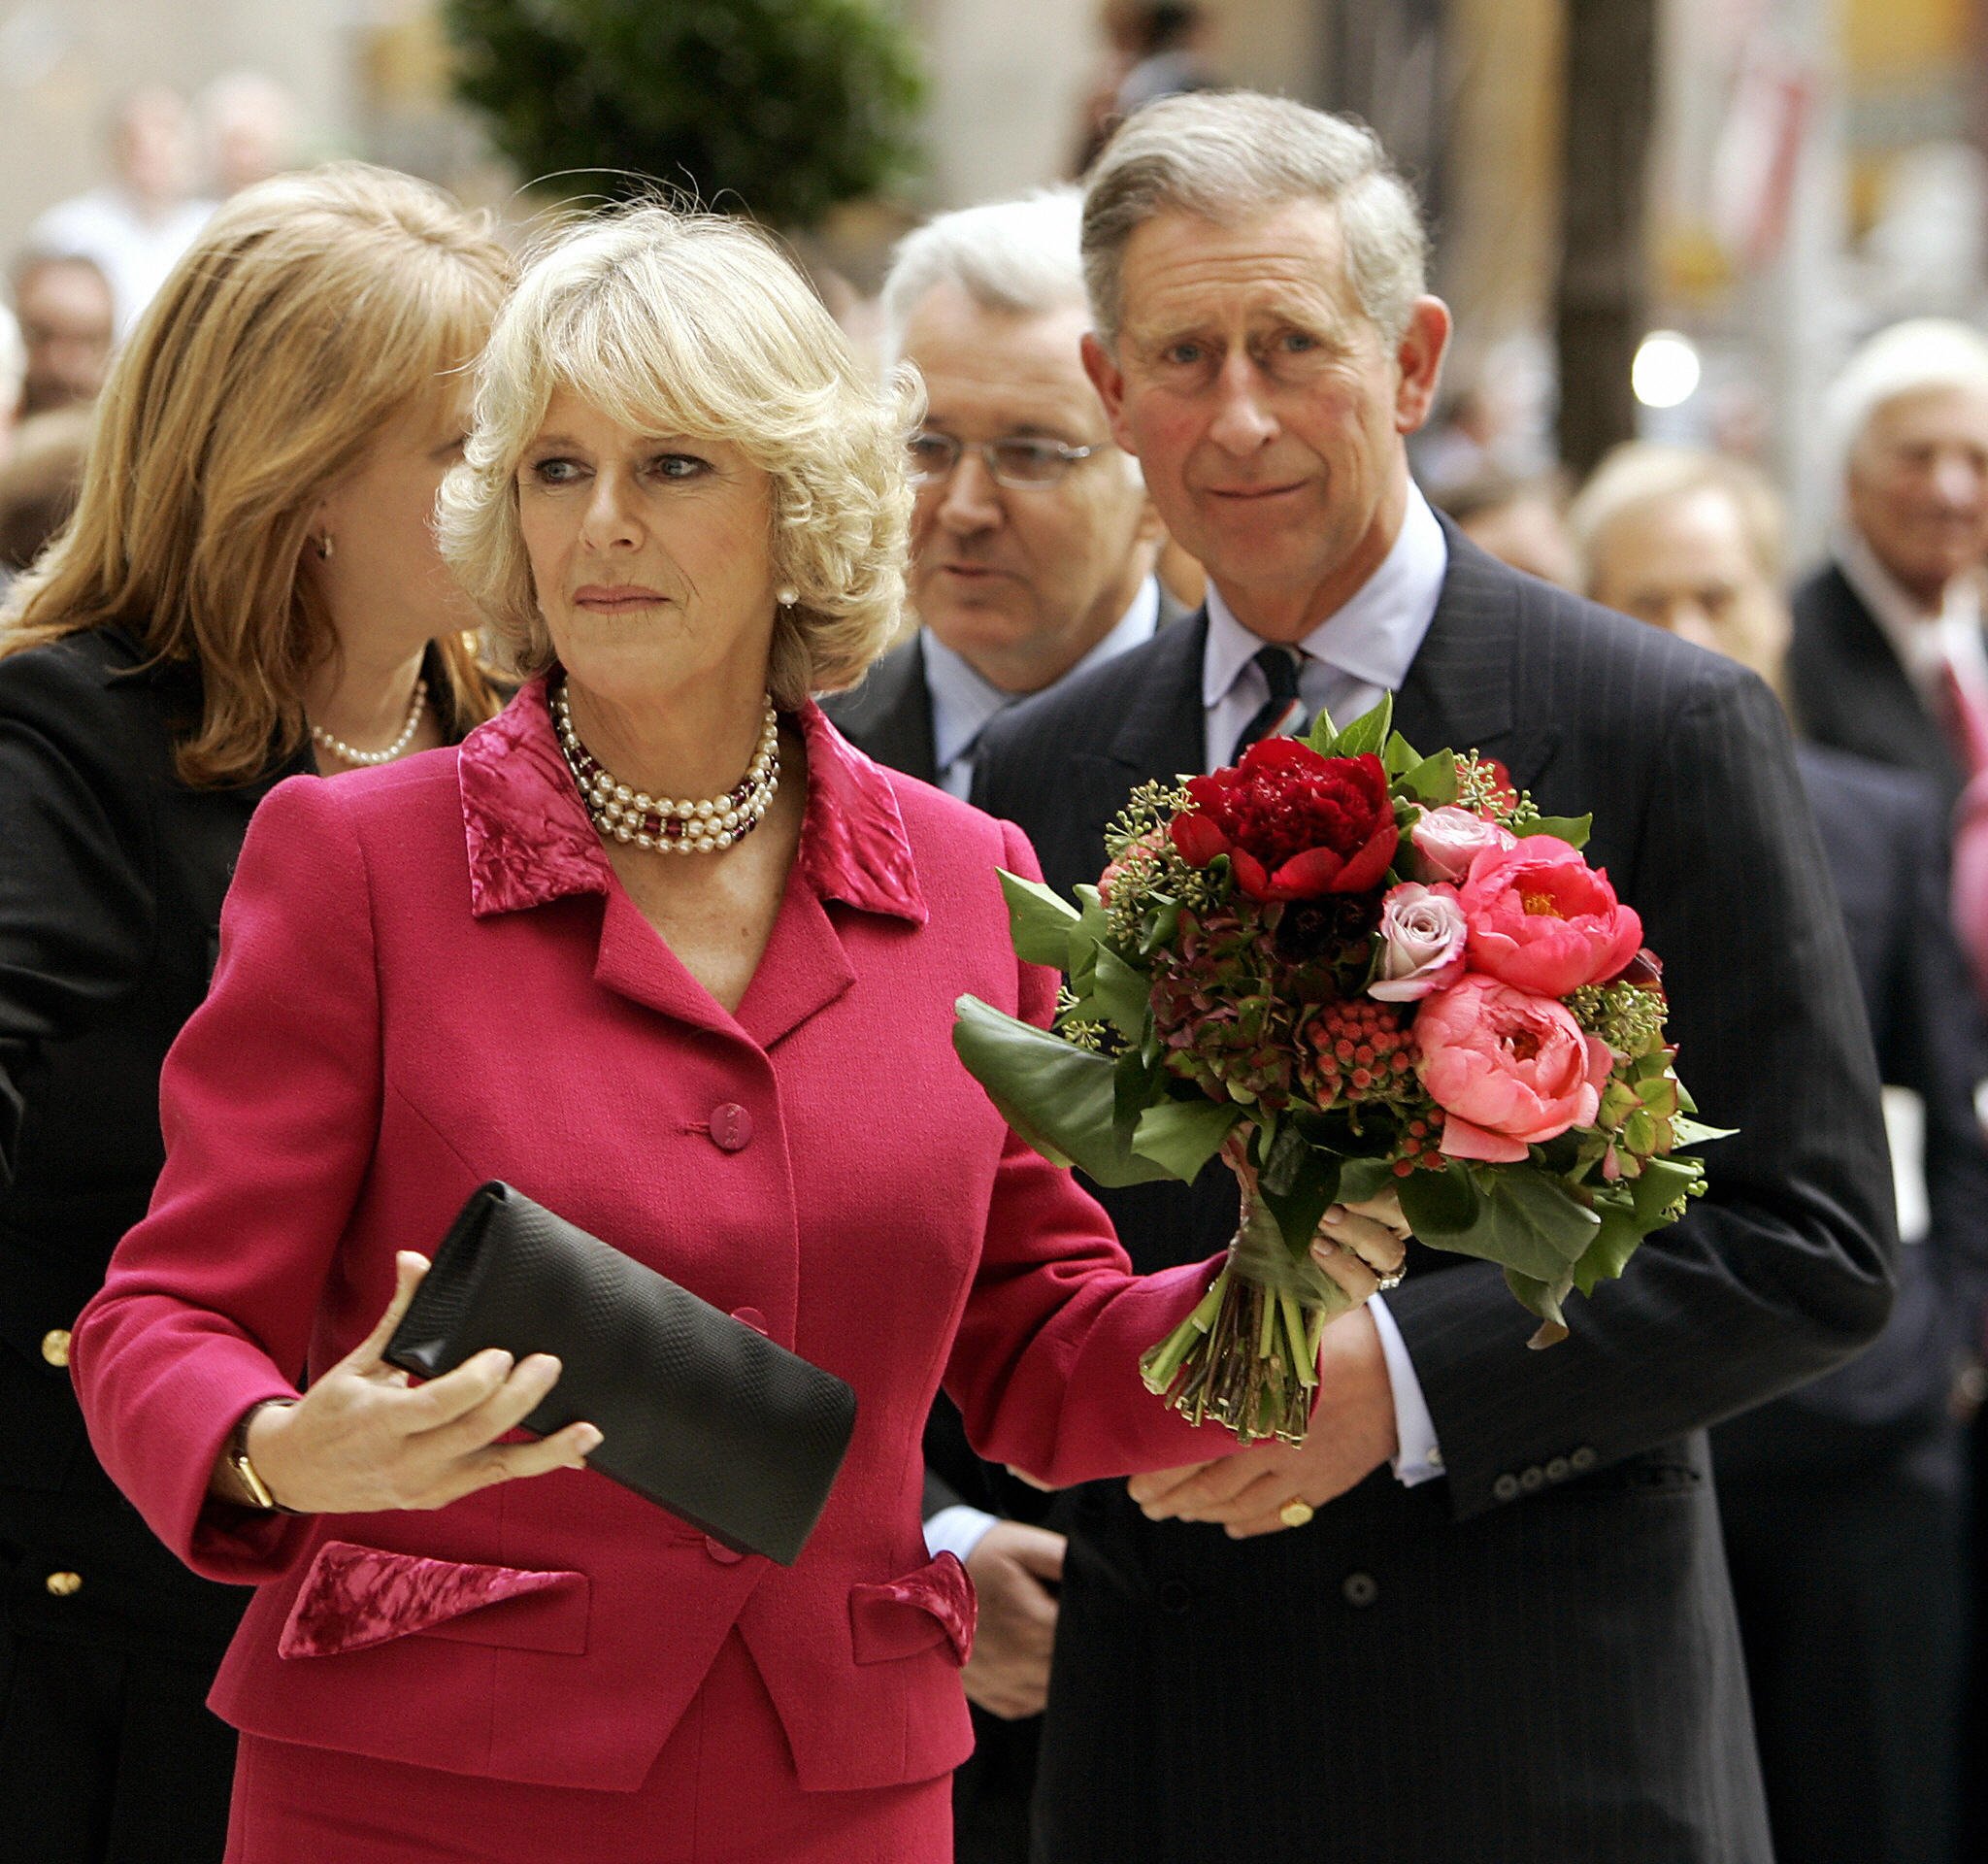 Britain's Prince Charles and wife, Camilla, Duchess of Cornwall, walk around the garden area before they unveil the center stone for the British Memorial Garden at Hanover Square in Lower Manhattan 01 November 2005. | Source: Getty Images